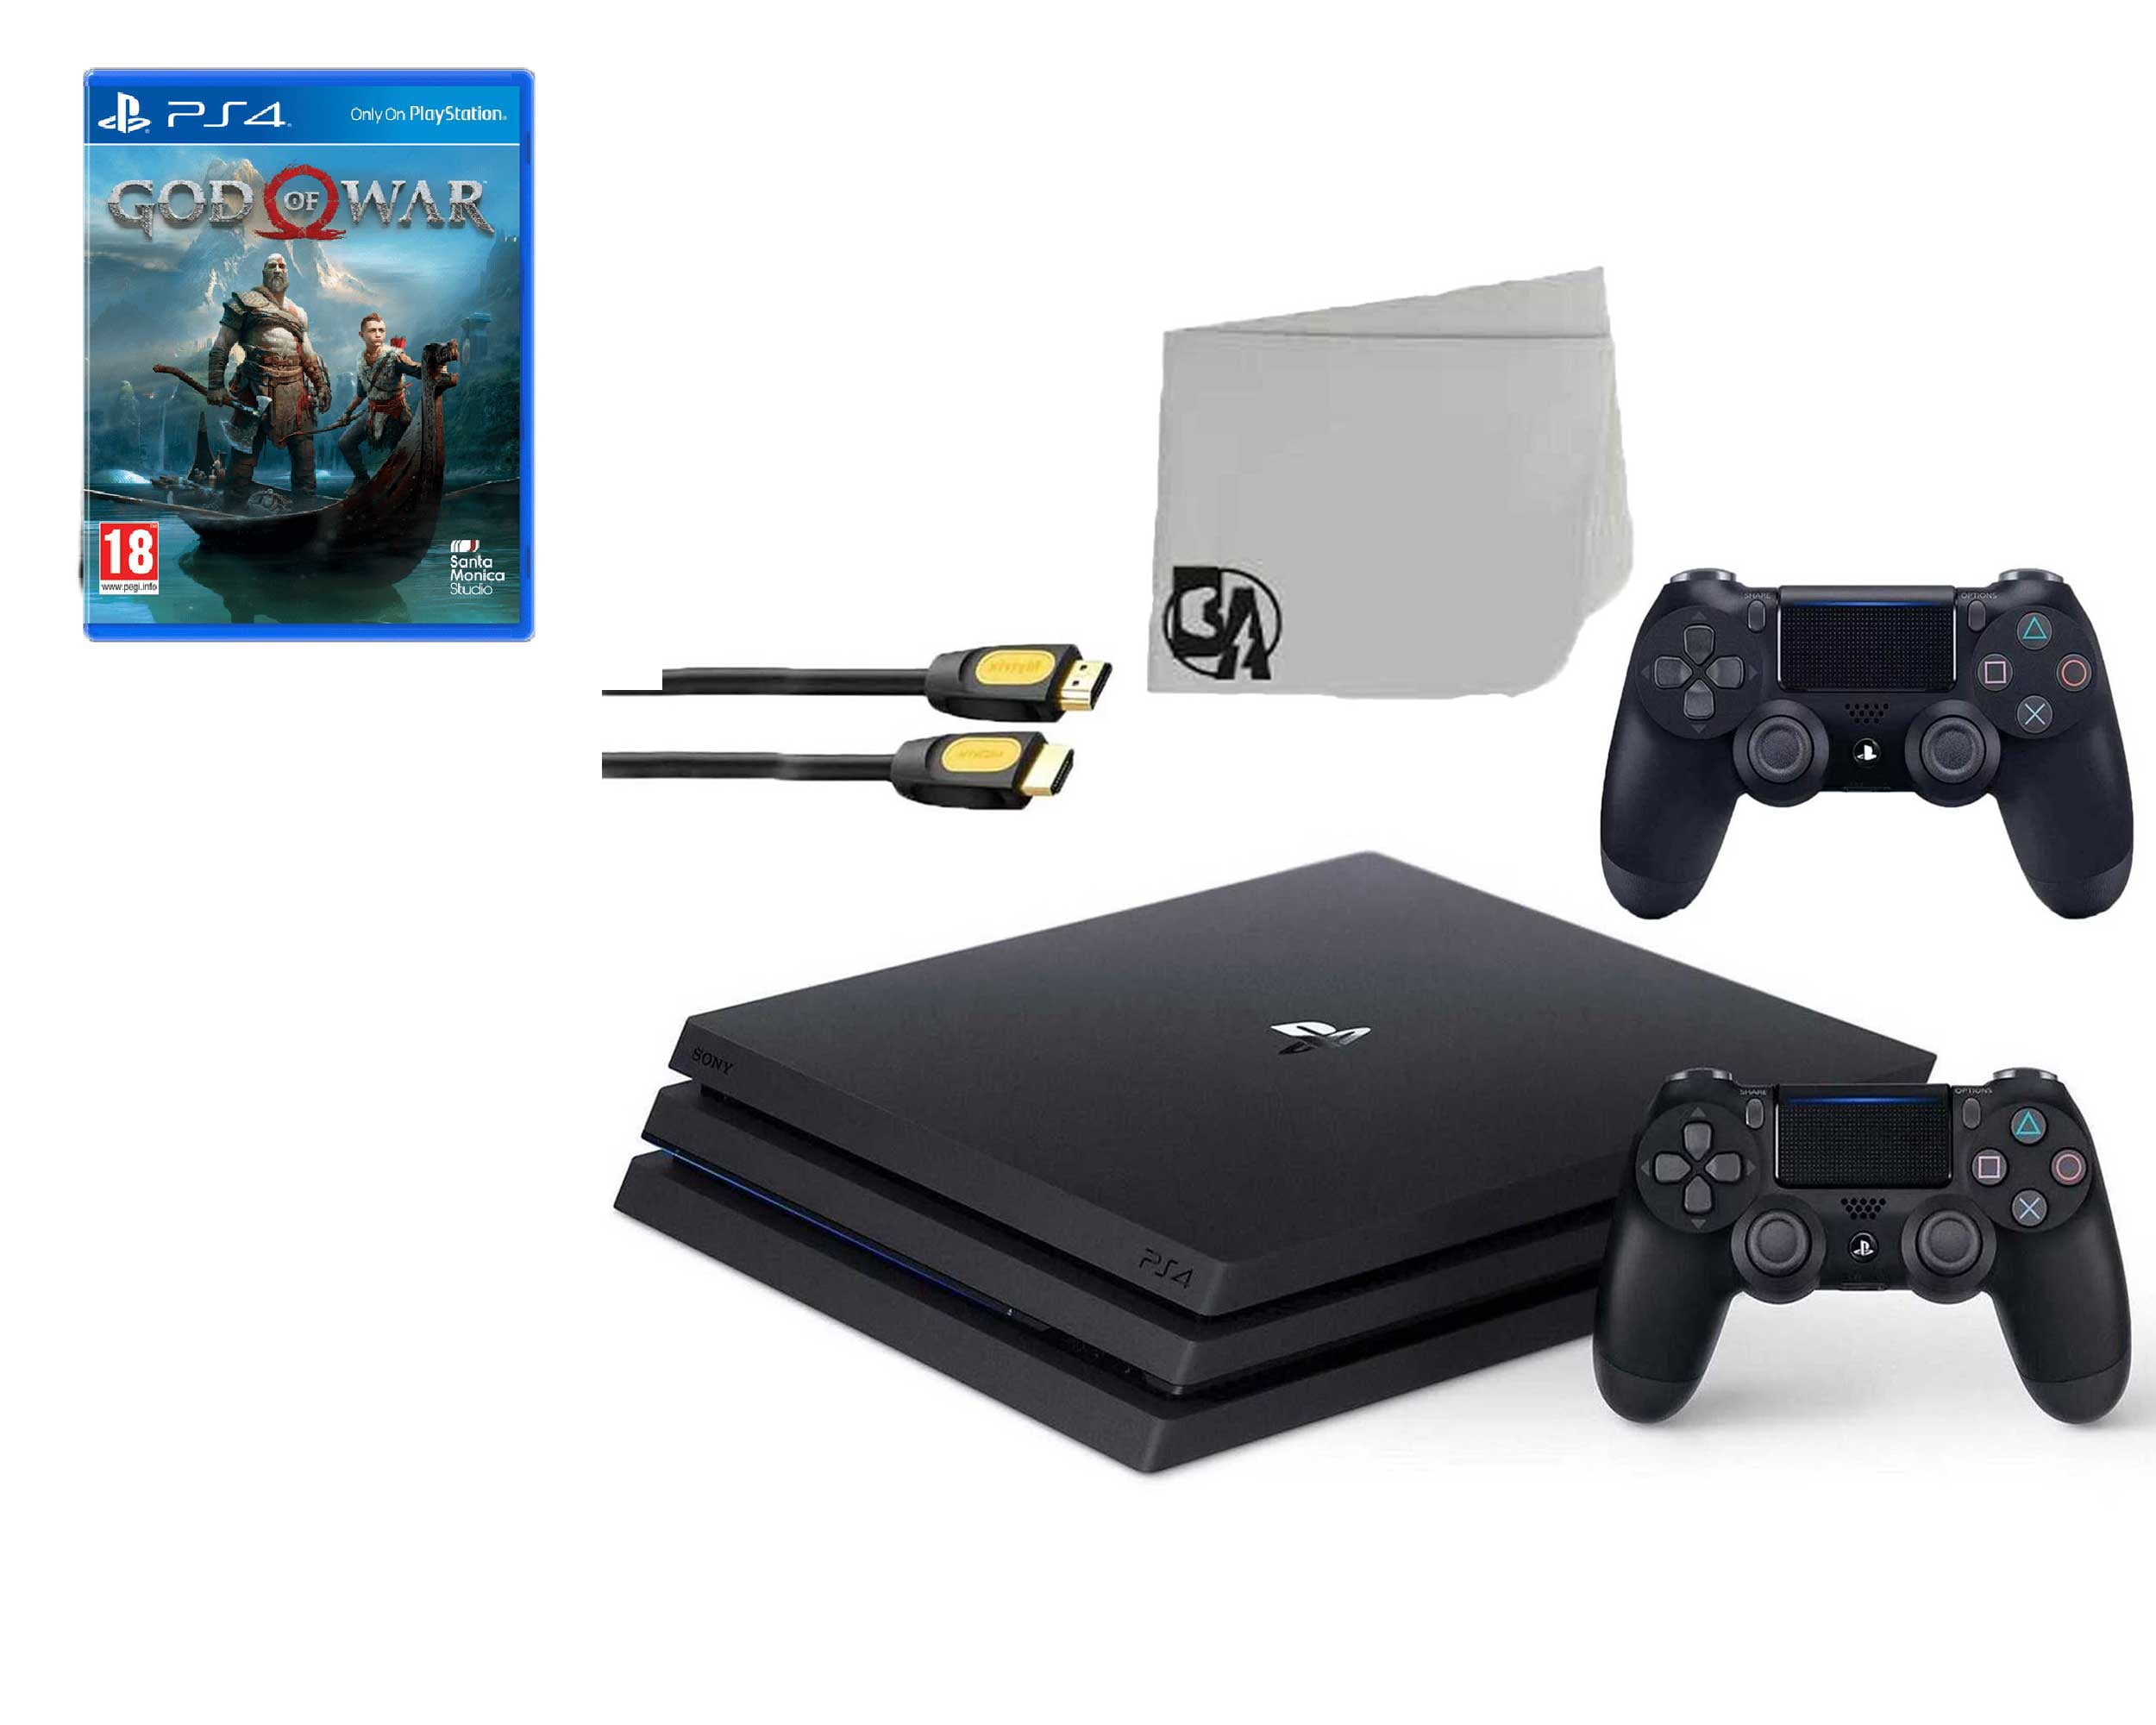 en gang bagagerum Beskæftiget Sony PlayStation 4 Pro 1TB Gaming Console Black 2 Controller Included with Red  Dead Redemption 2 BOLT AXTION Bundle Like New - Walmart.com